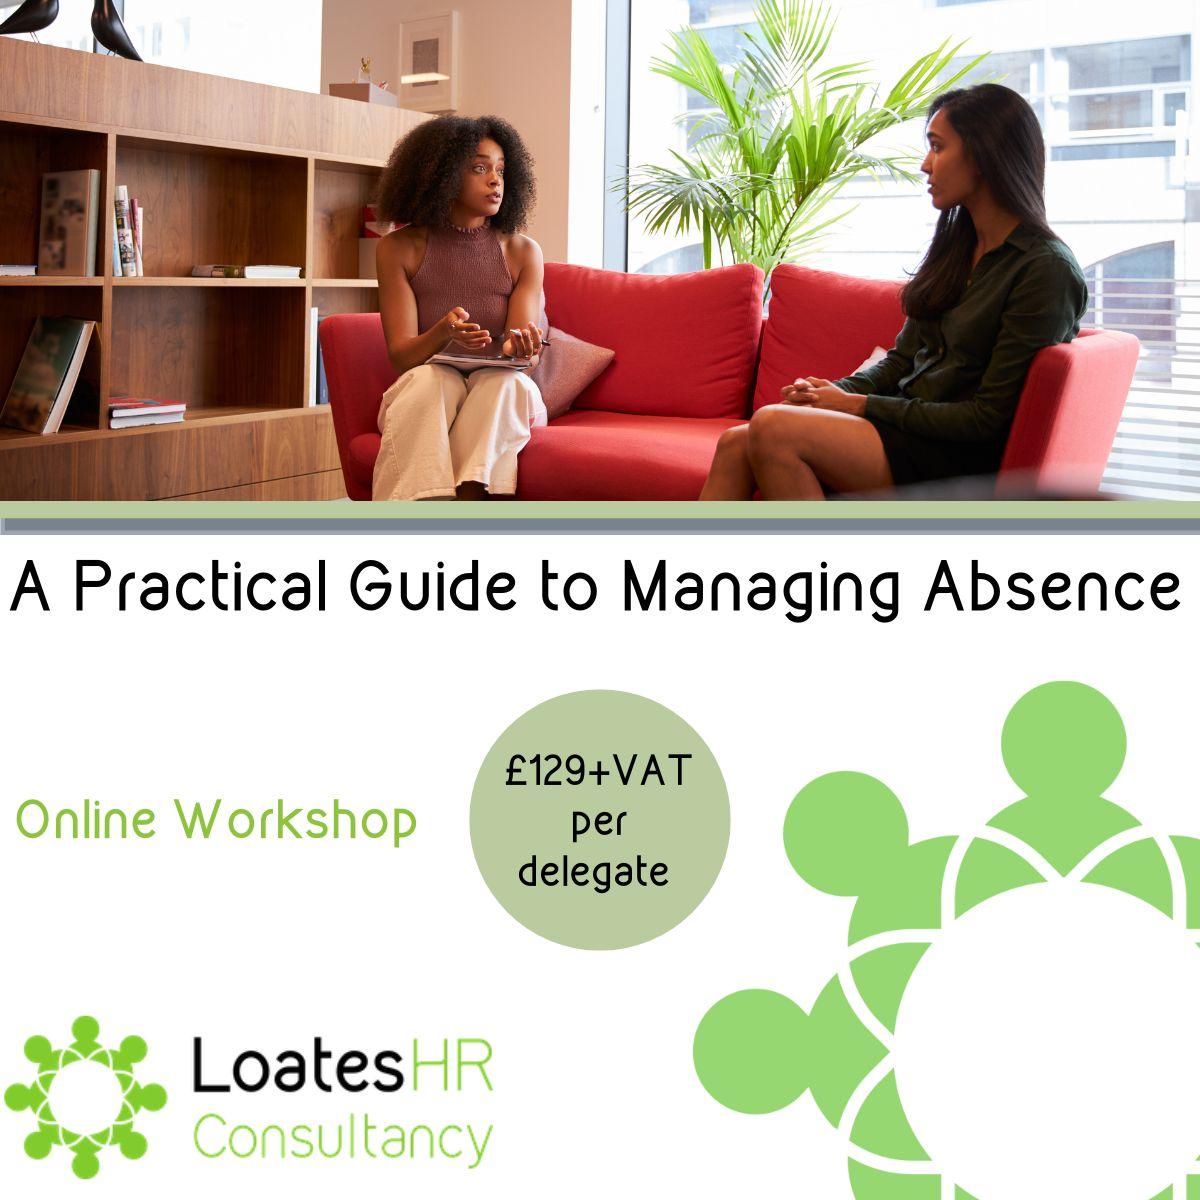 Take control of managing absence in your business! Join us on Wed 3 May 2023 for our online training course 'A Practical Guide to Managing Absence' 📚🤓👩‍🏫 #ManageAbsence #HRTraining #OnlineCourse bit.ly/3jlMcCS